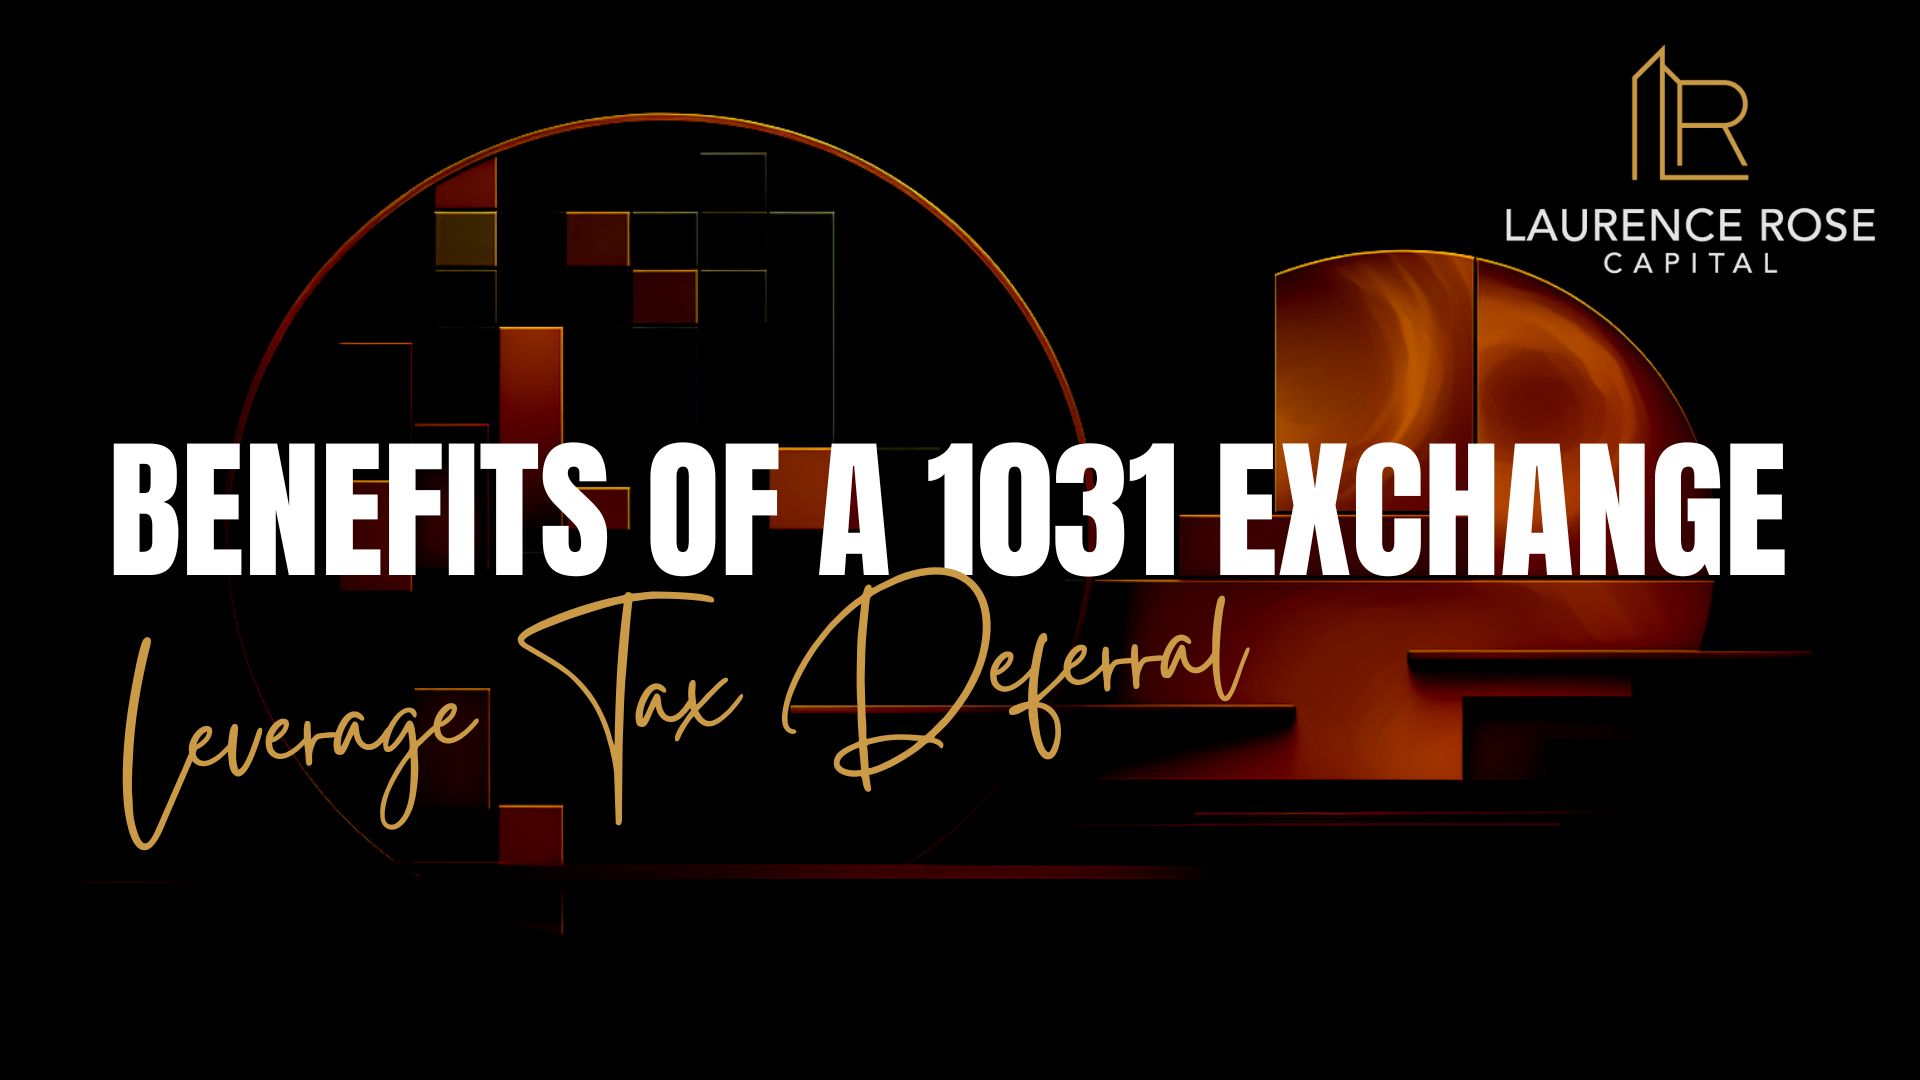 Benefits of a 1031 Exchange